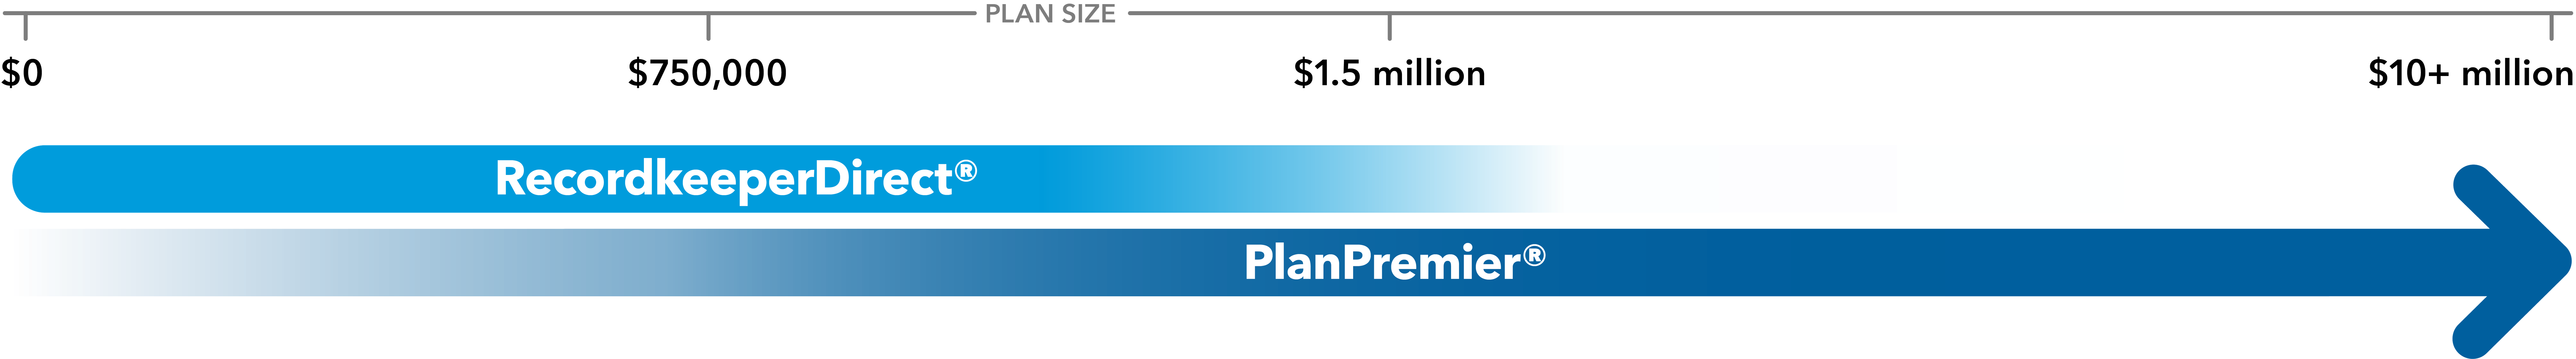 Graphic shows the suggested target plan size (assets) for RecordkeeperDirect ranges from $0 to about $1.5 million, and for PlanPremier ranges from about $0 to beyond $10+ million.